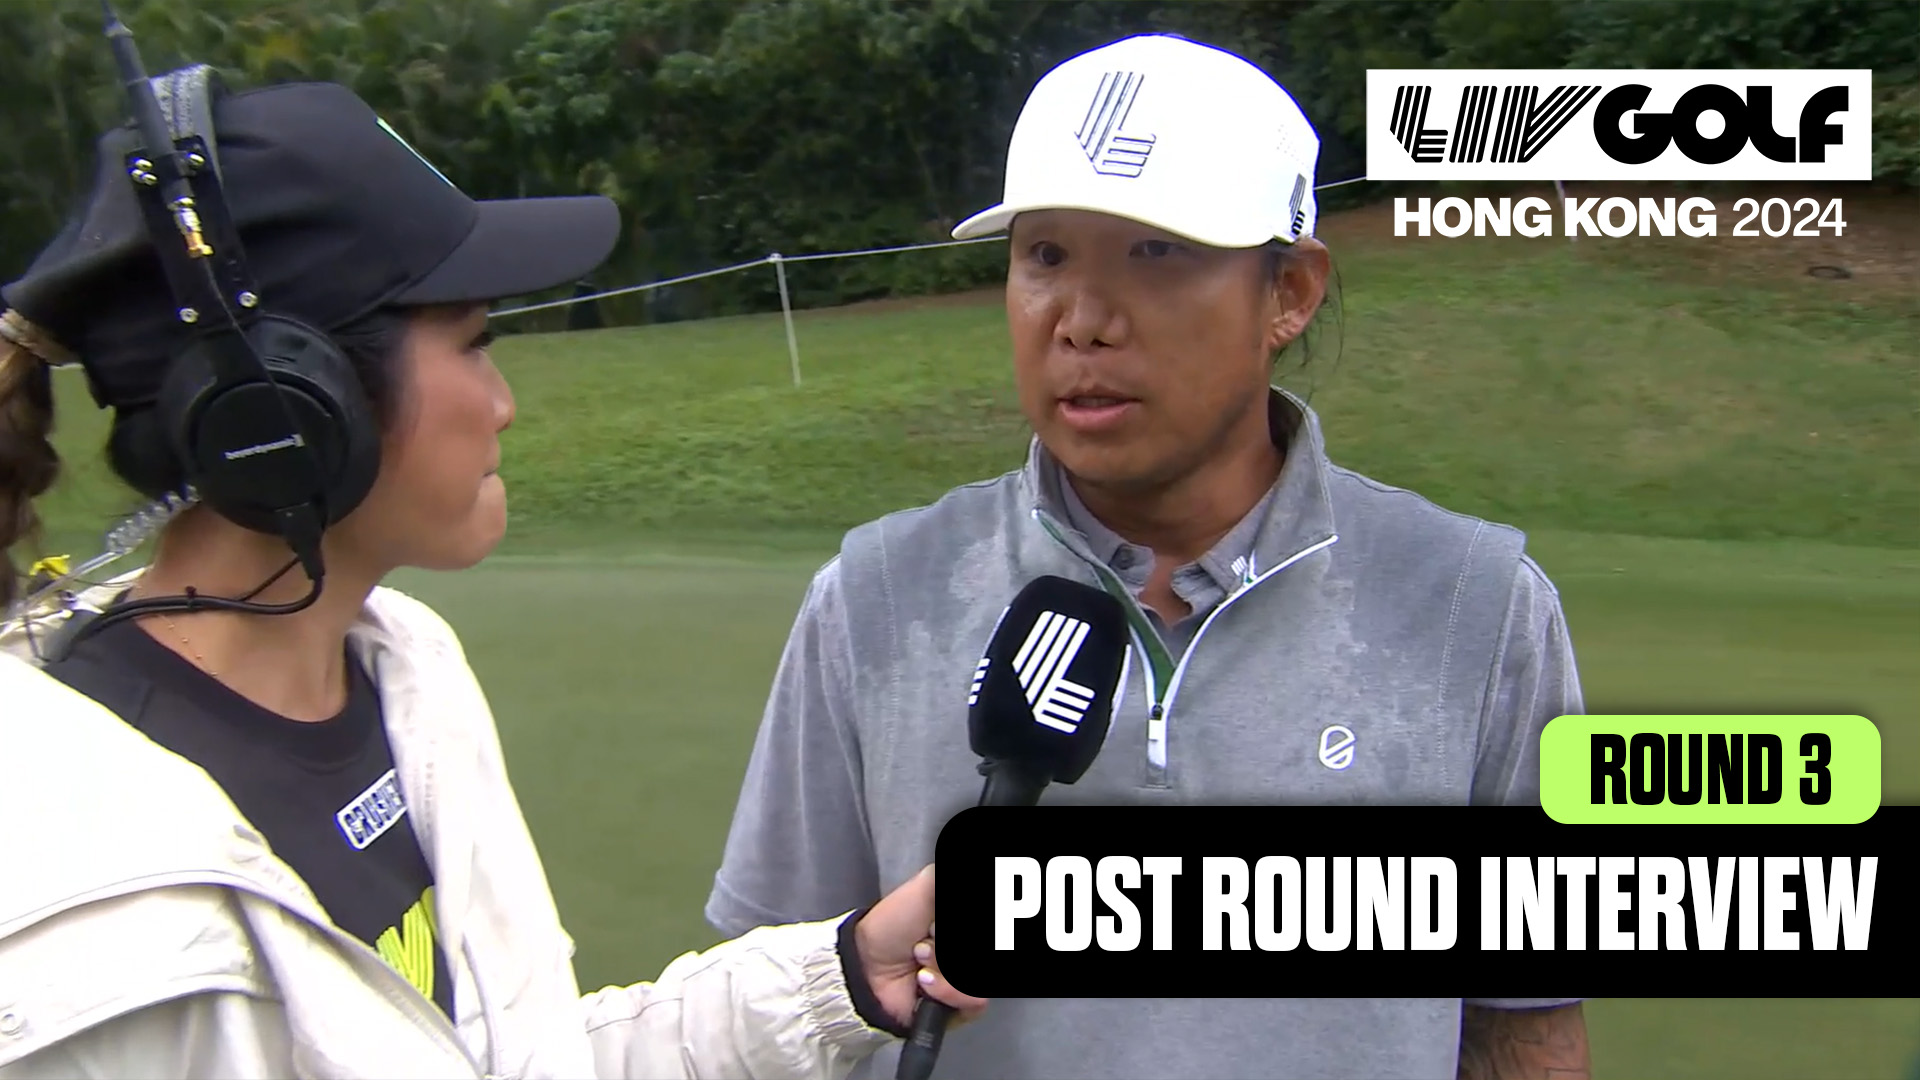 INTERVIEW: ANTHONY KIM "GRATEFUL FOR OPPORTUNITY" AFTER CARDING 65: | LIV GOLF HONG KONG